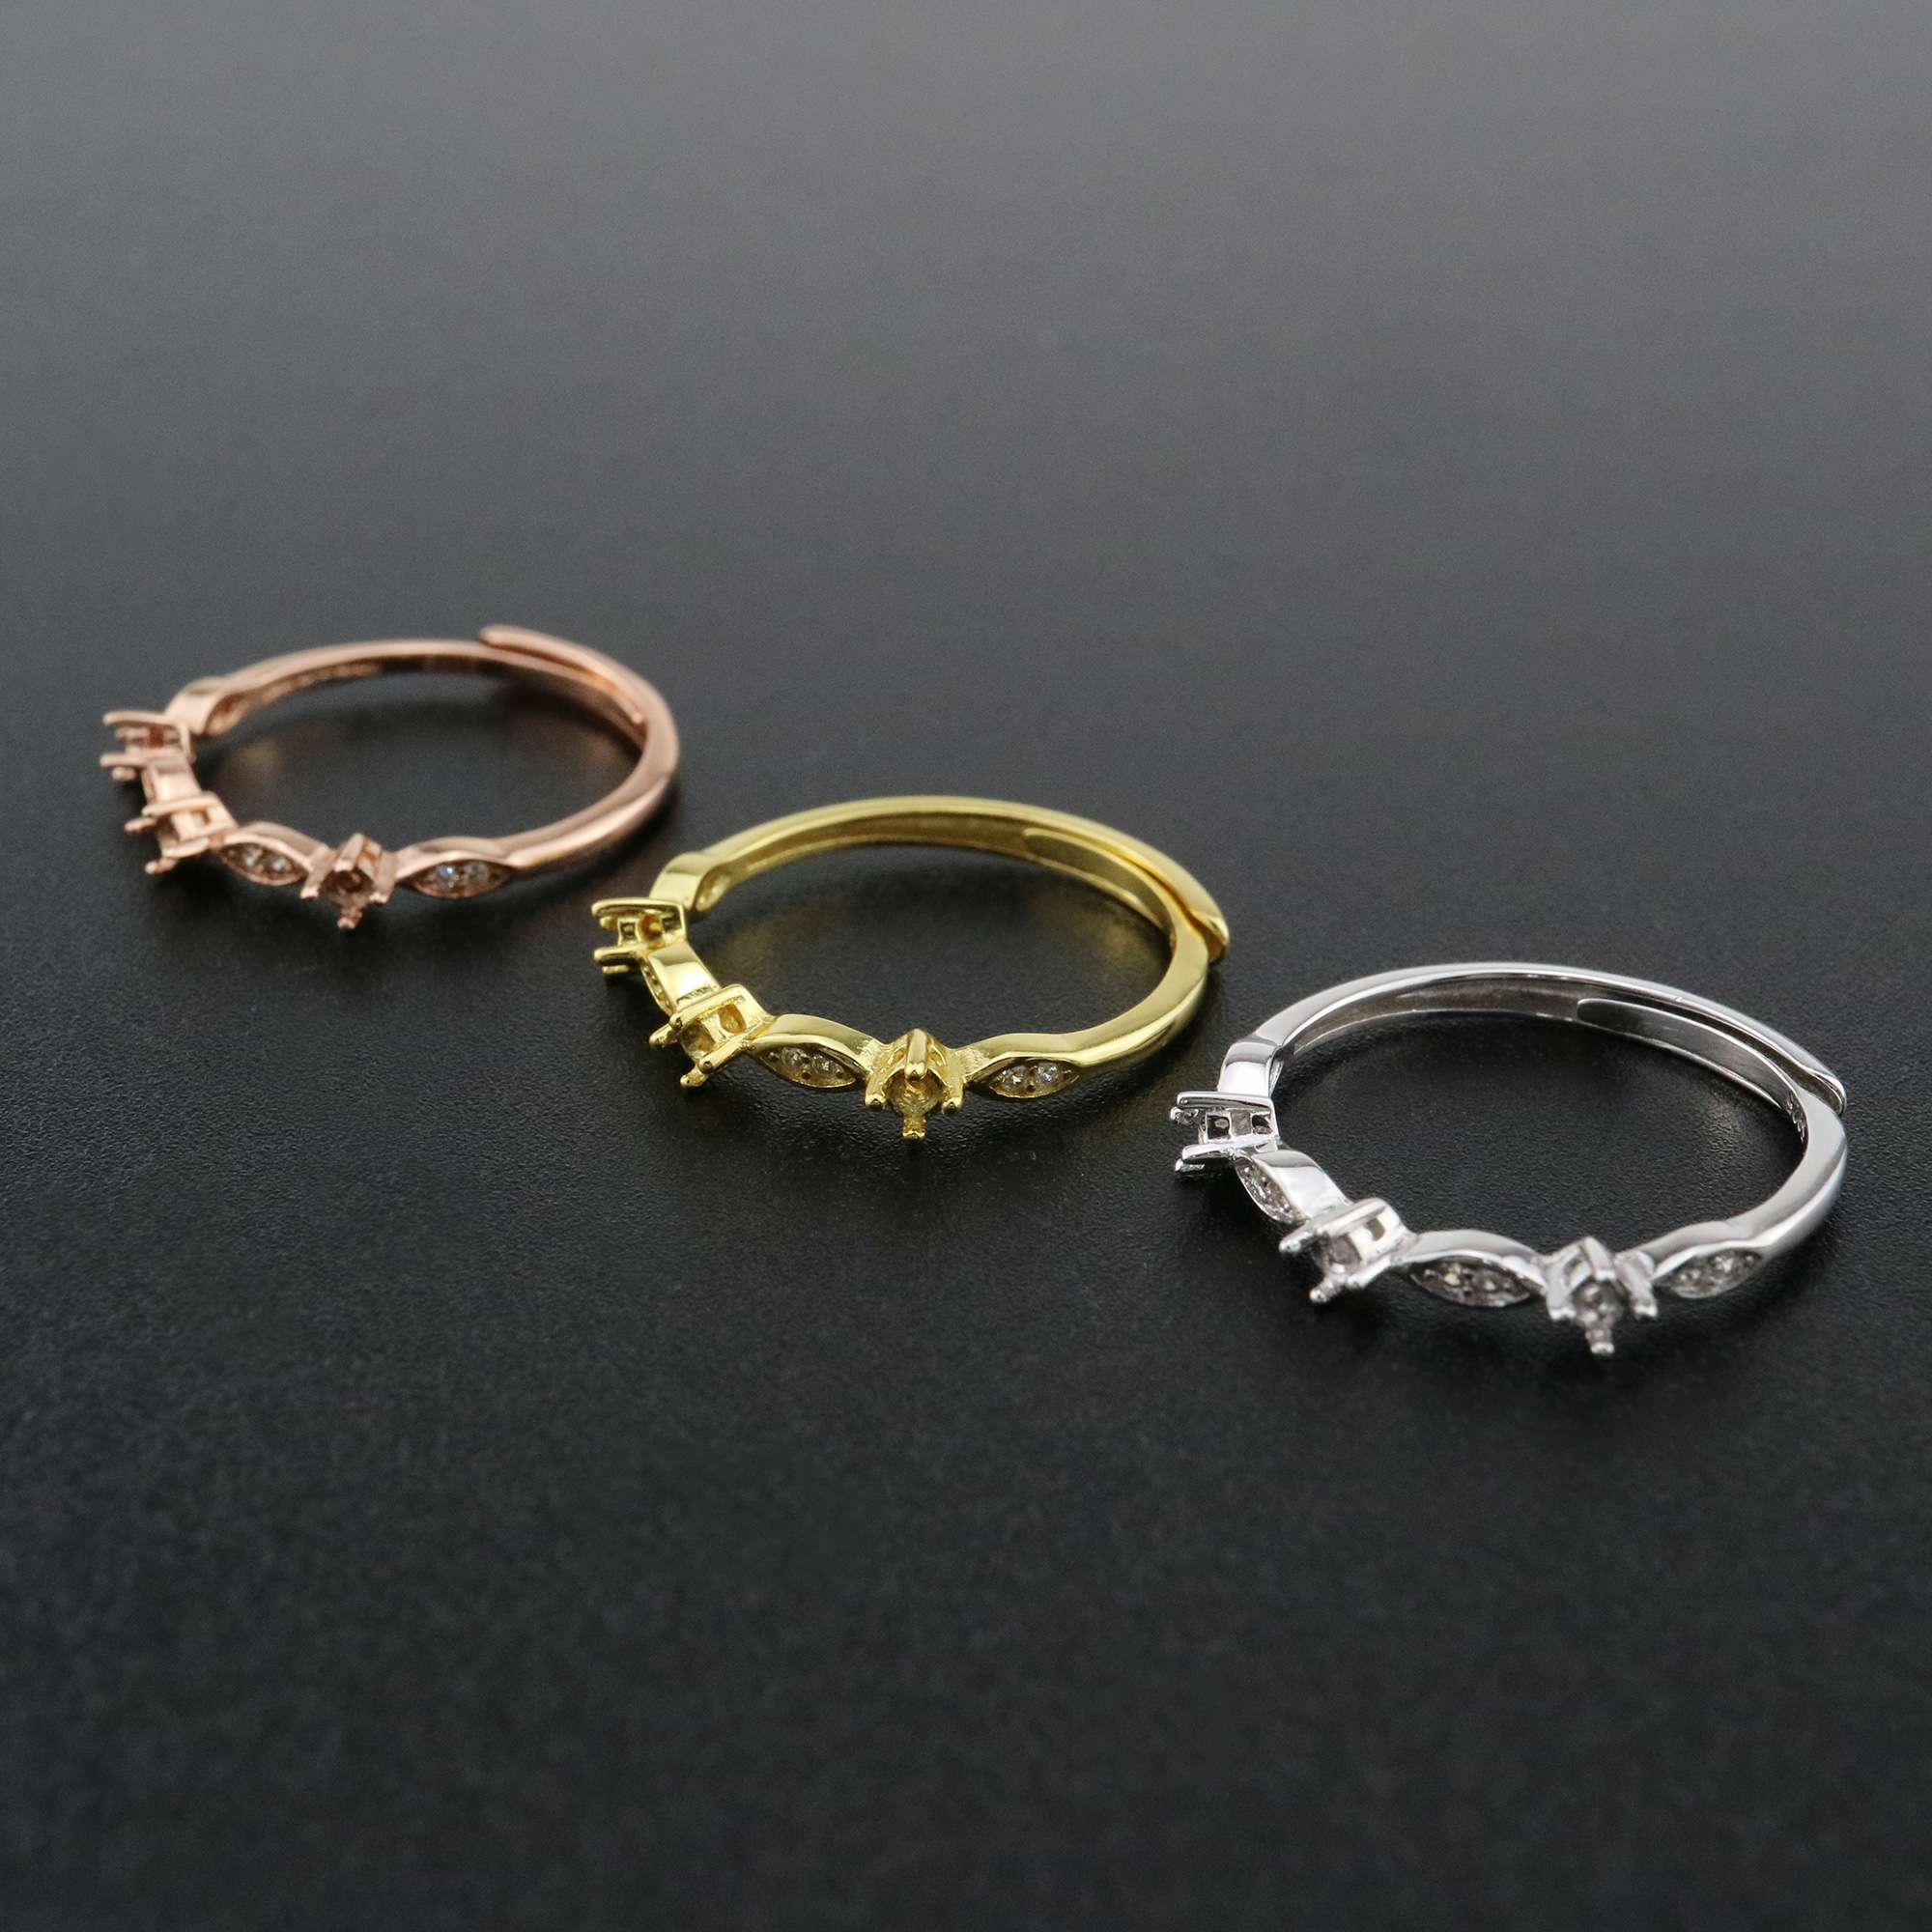 1Pcs 2MM Round Bezel 3 Stones Vintage Style Rose Gold Plated Solid 925 Sterling Silver Adjustable Prong Ring Settings Blank for Gemstone 1210071 - Click Image to Close